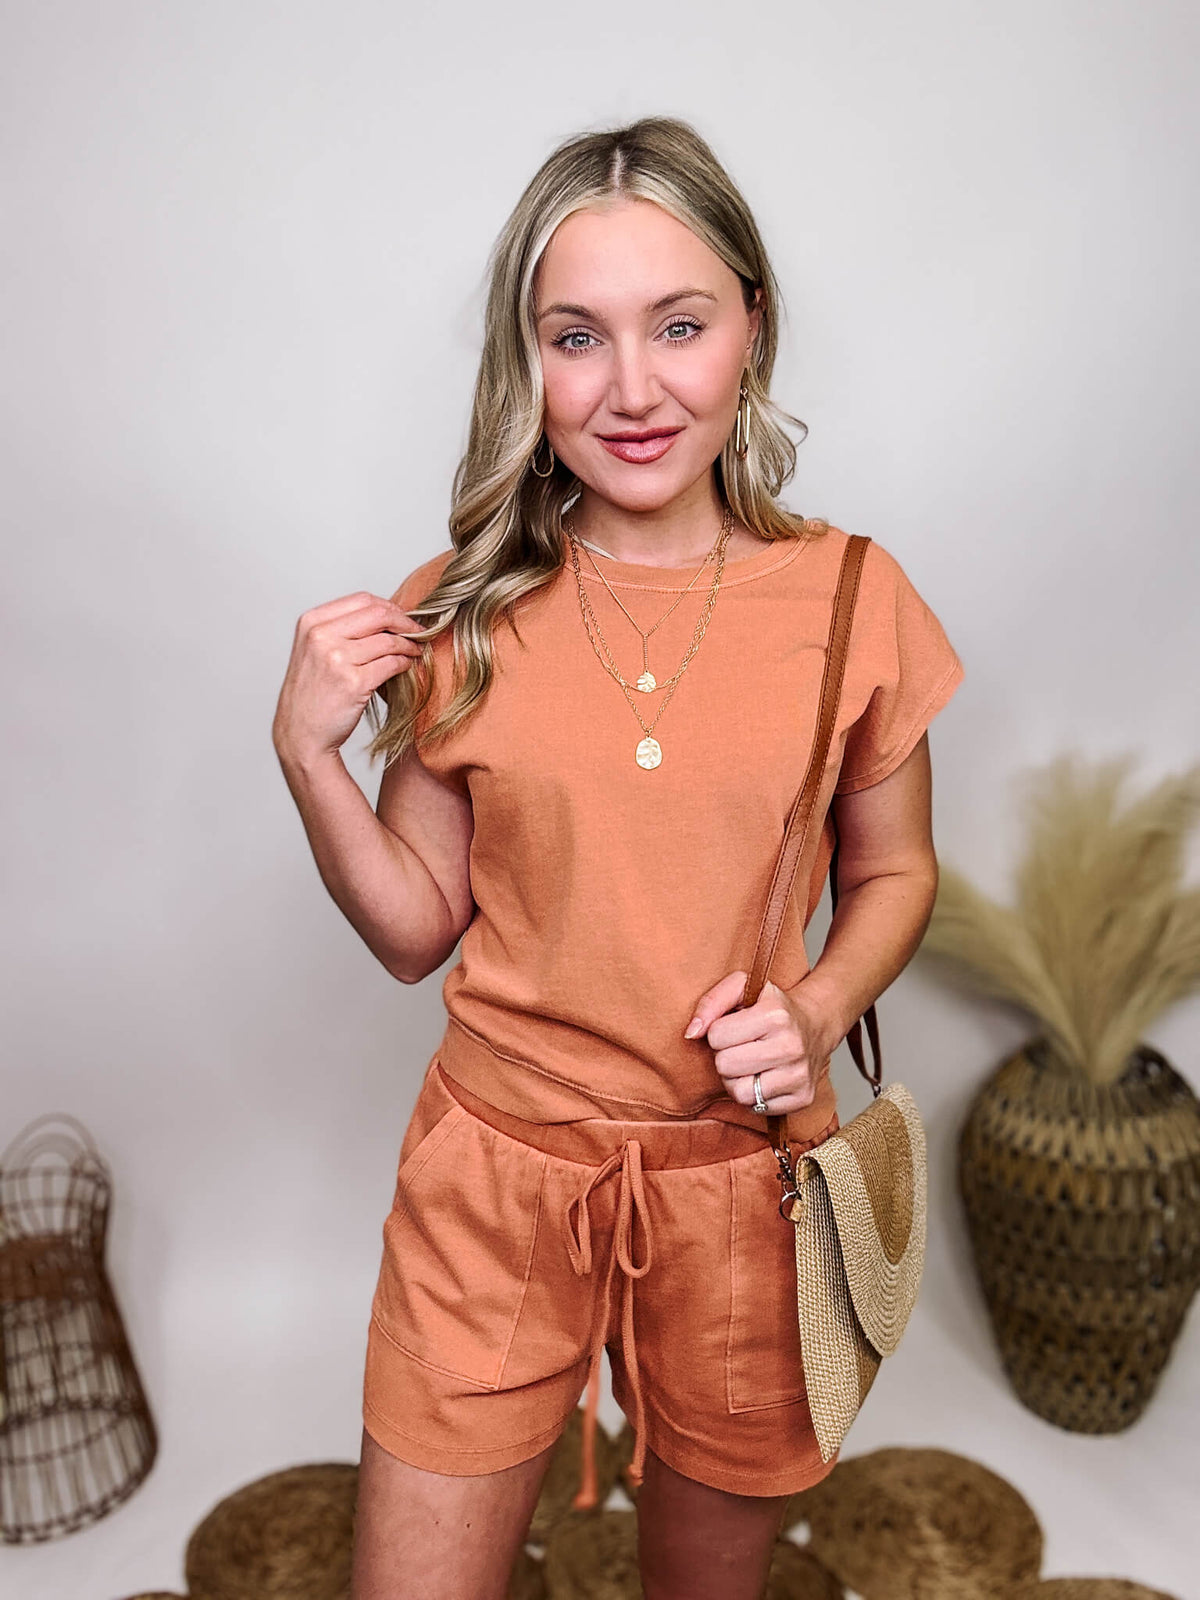 Sunset Clay Comfy Matching Short and Tee Set Elastic Stretchy Waistband Faux Drawstring Pockets 100% Cotton **Each item is unique due to the washSunset Clay Comfy Matching Short and Tee Set Elastic Stretchy Waistband Faux Drawstring Pockets 100% Cotton **Each item is unique due to the wash